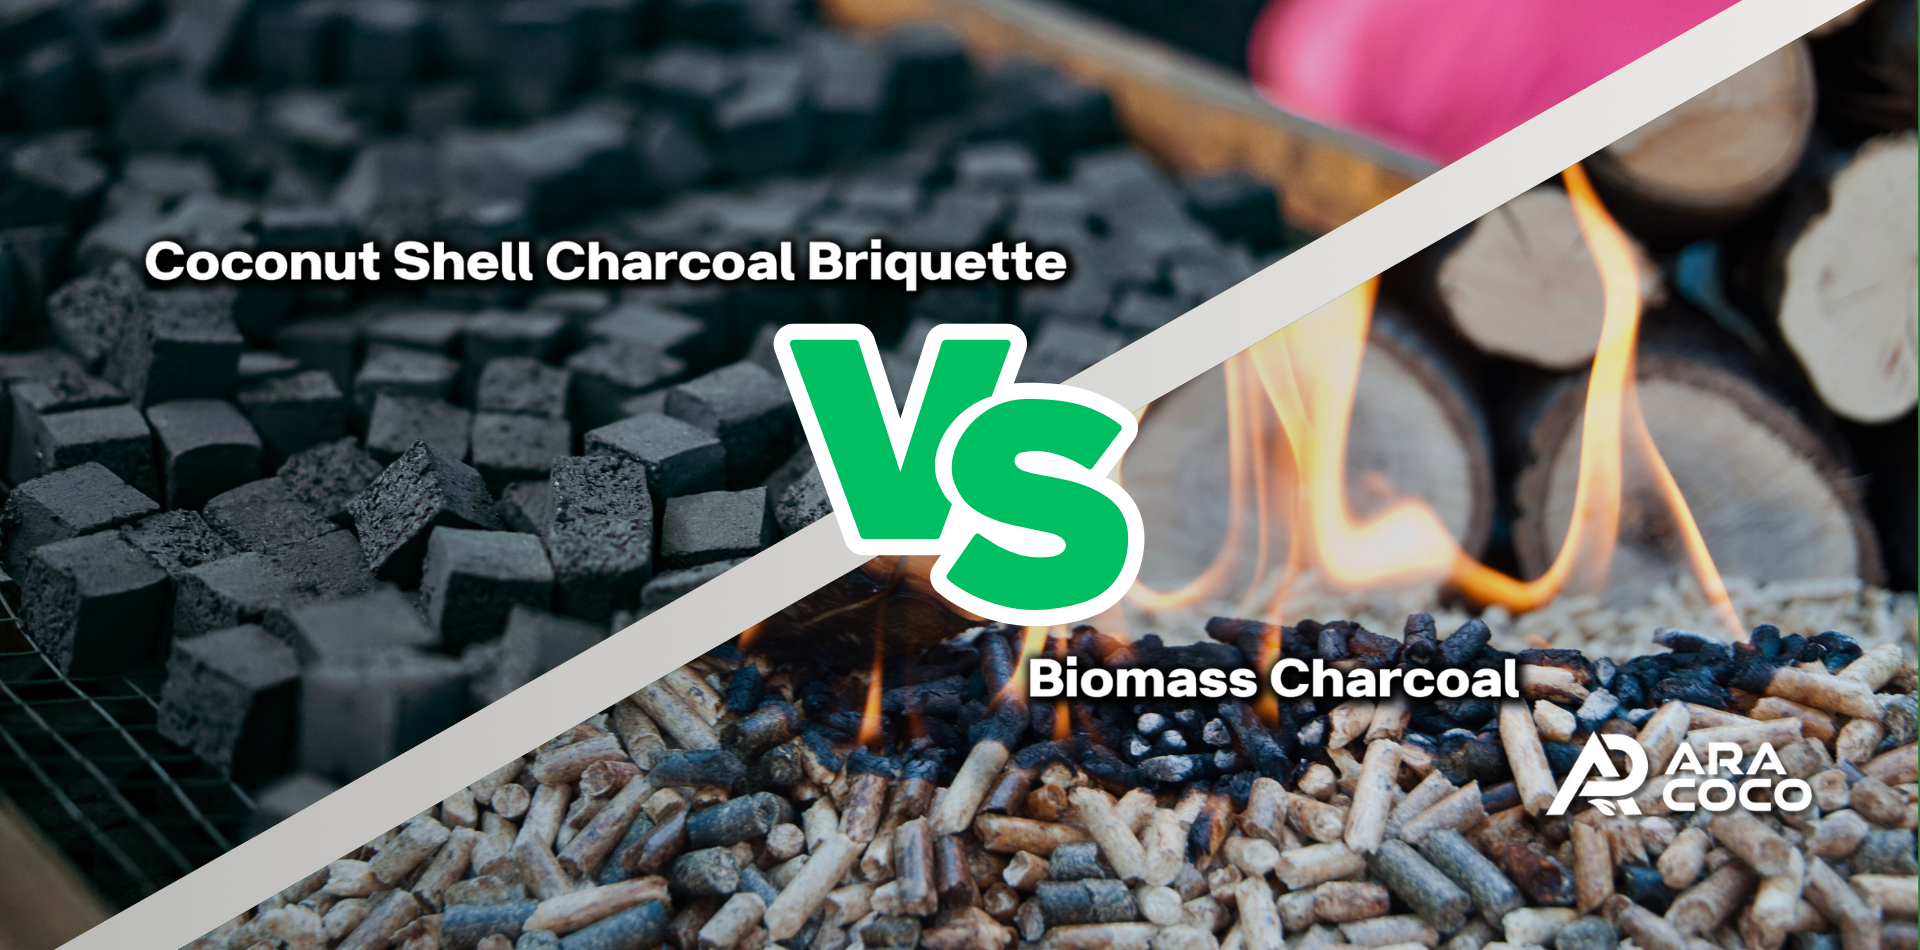 Coconut Shell Charcoal Briquette vs. Biomass Charcoal: Comparing to Understand the Differences